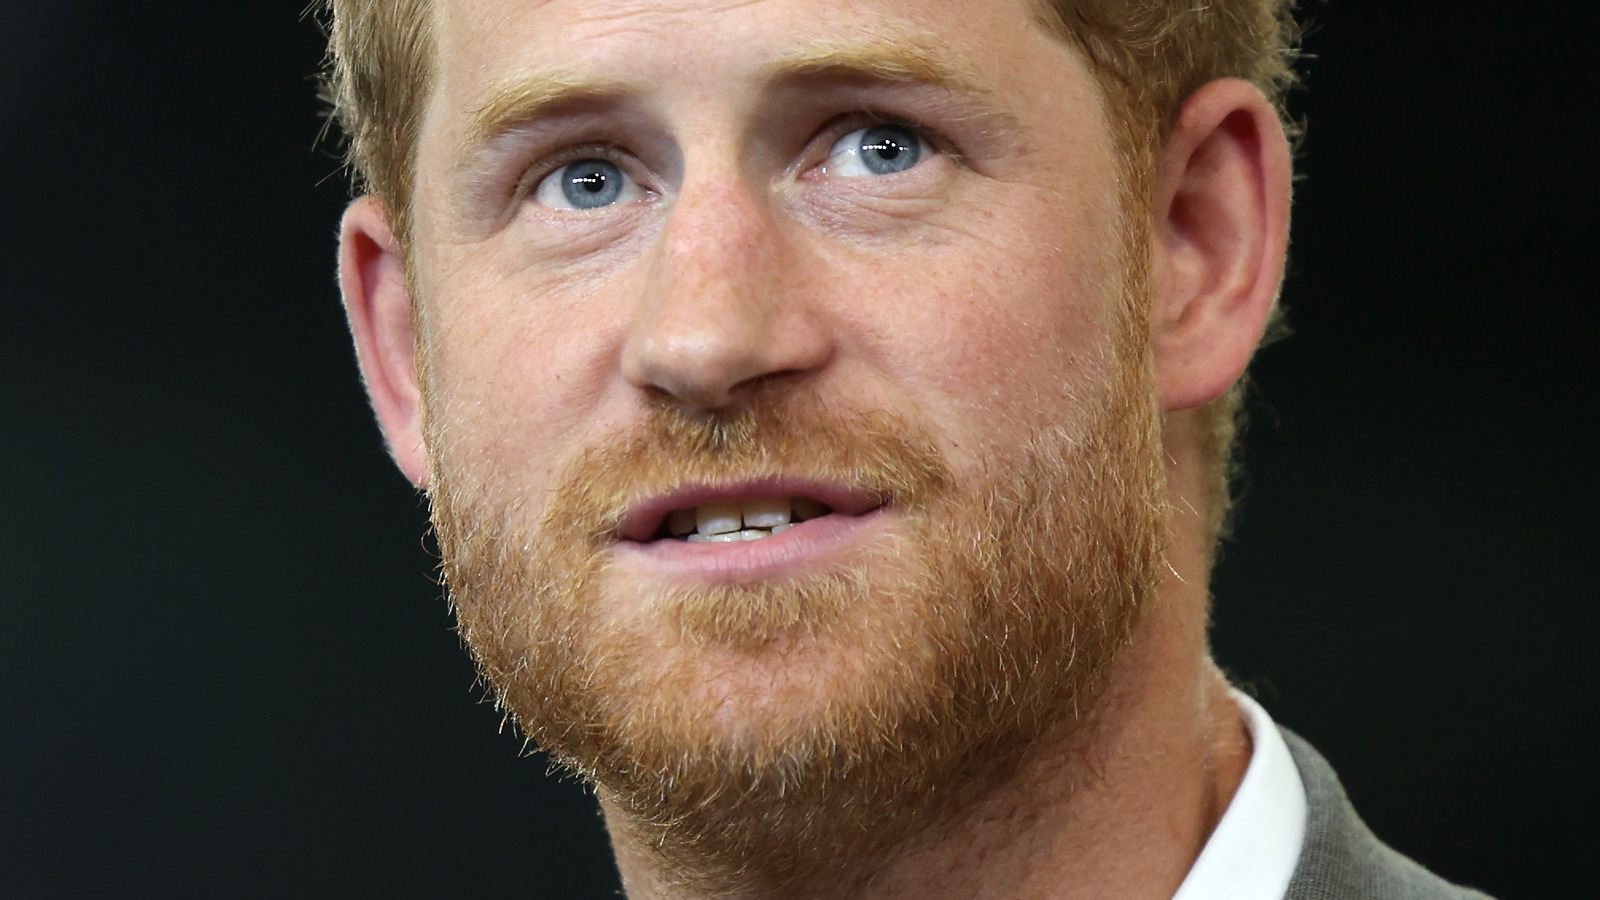 Royal Insider: Prince Harry Doesn’t Feel Bad About His Memoir’s Bombshell Contents